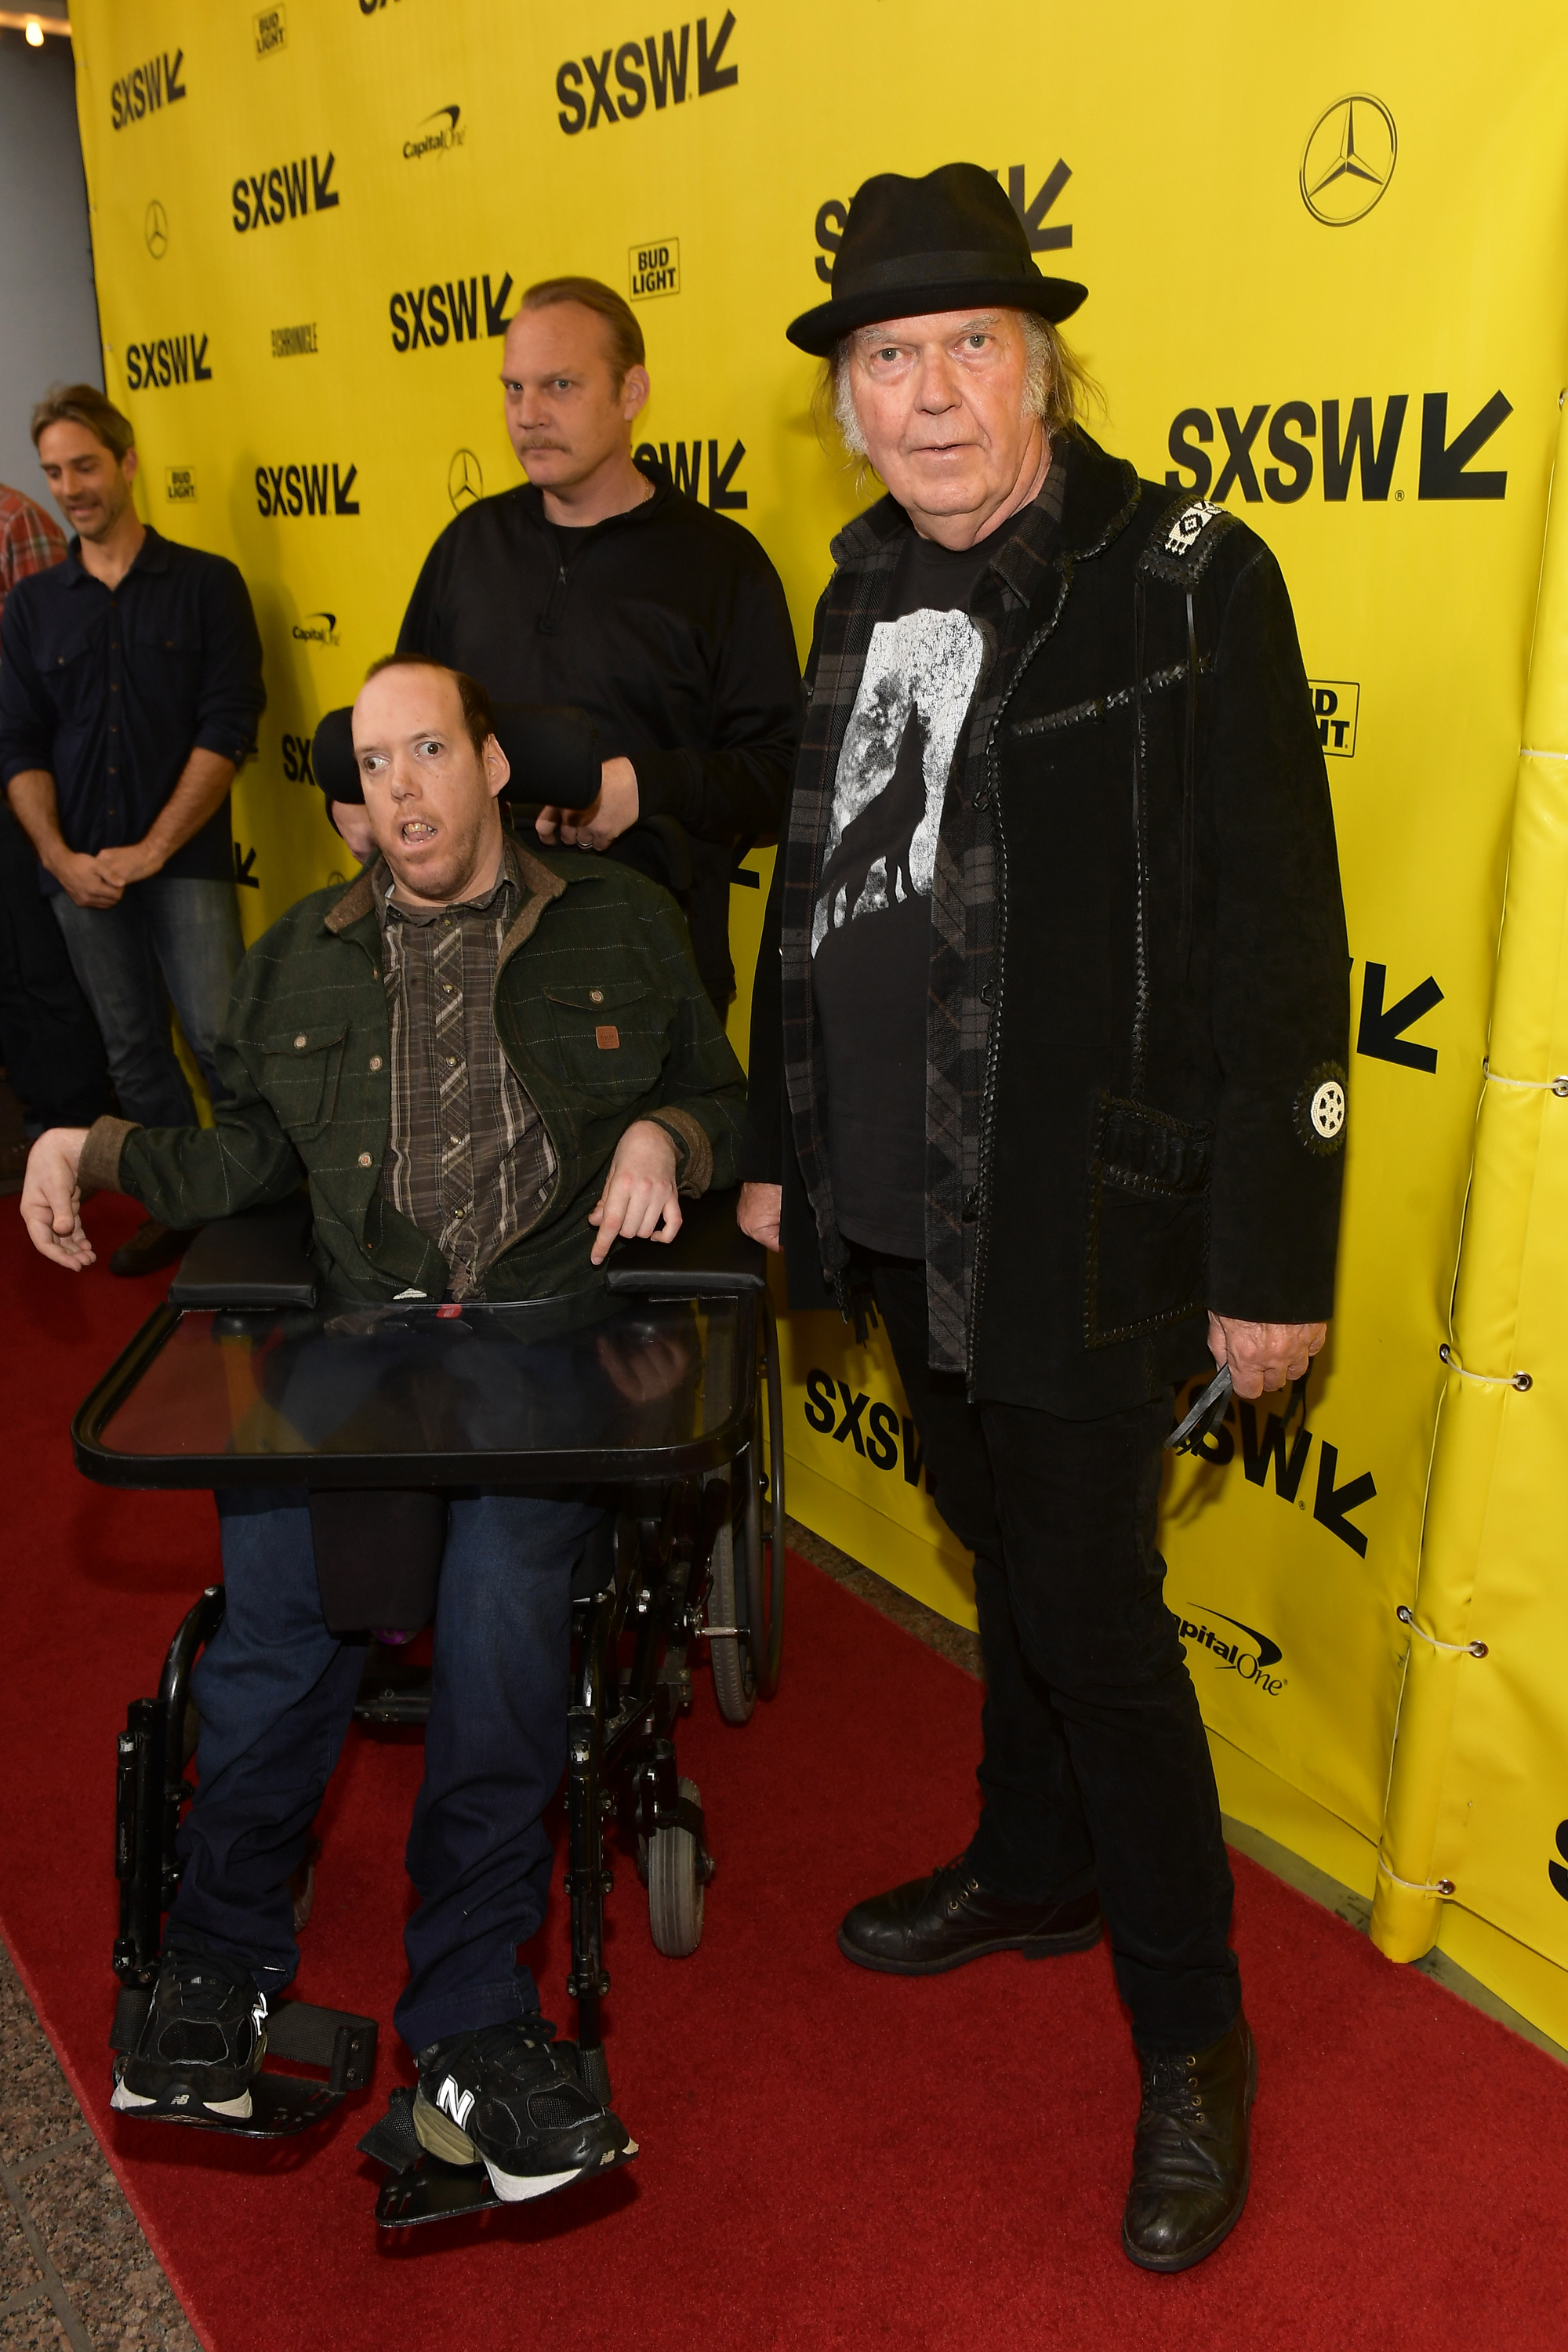 Zeke Young, Ben Young, and Neil Young attend the "Paradox" premiere in 2018, in Austin, Texas.